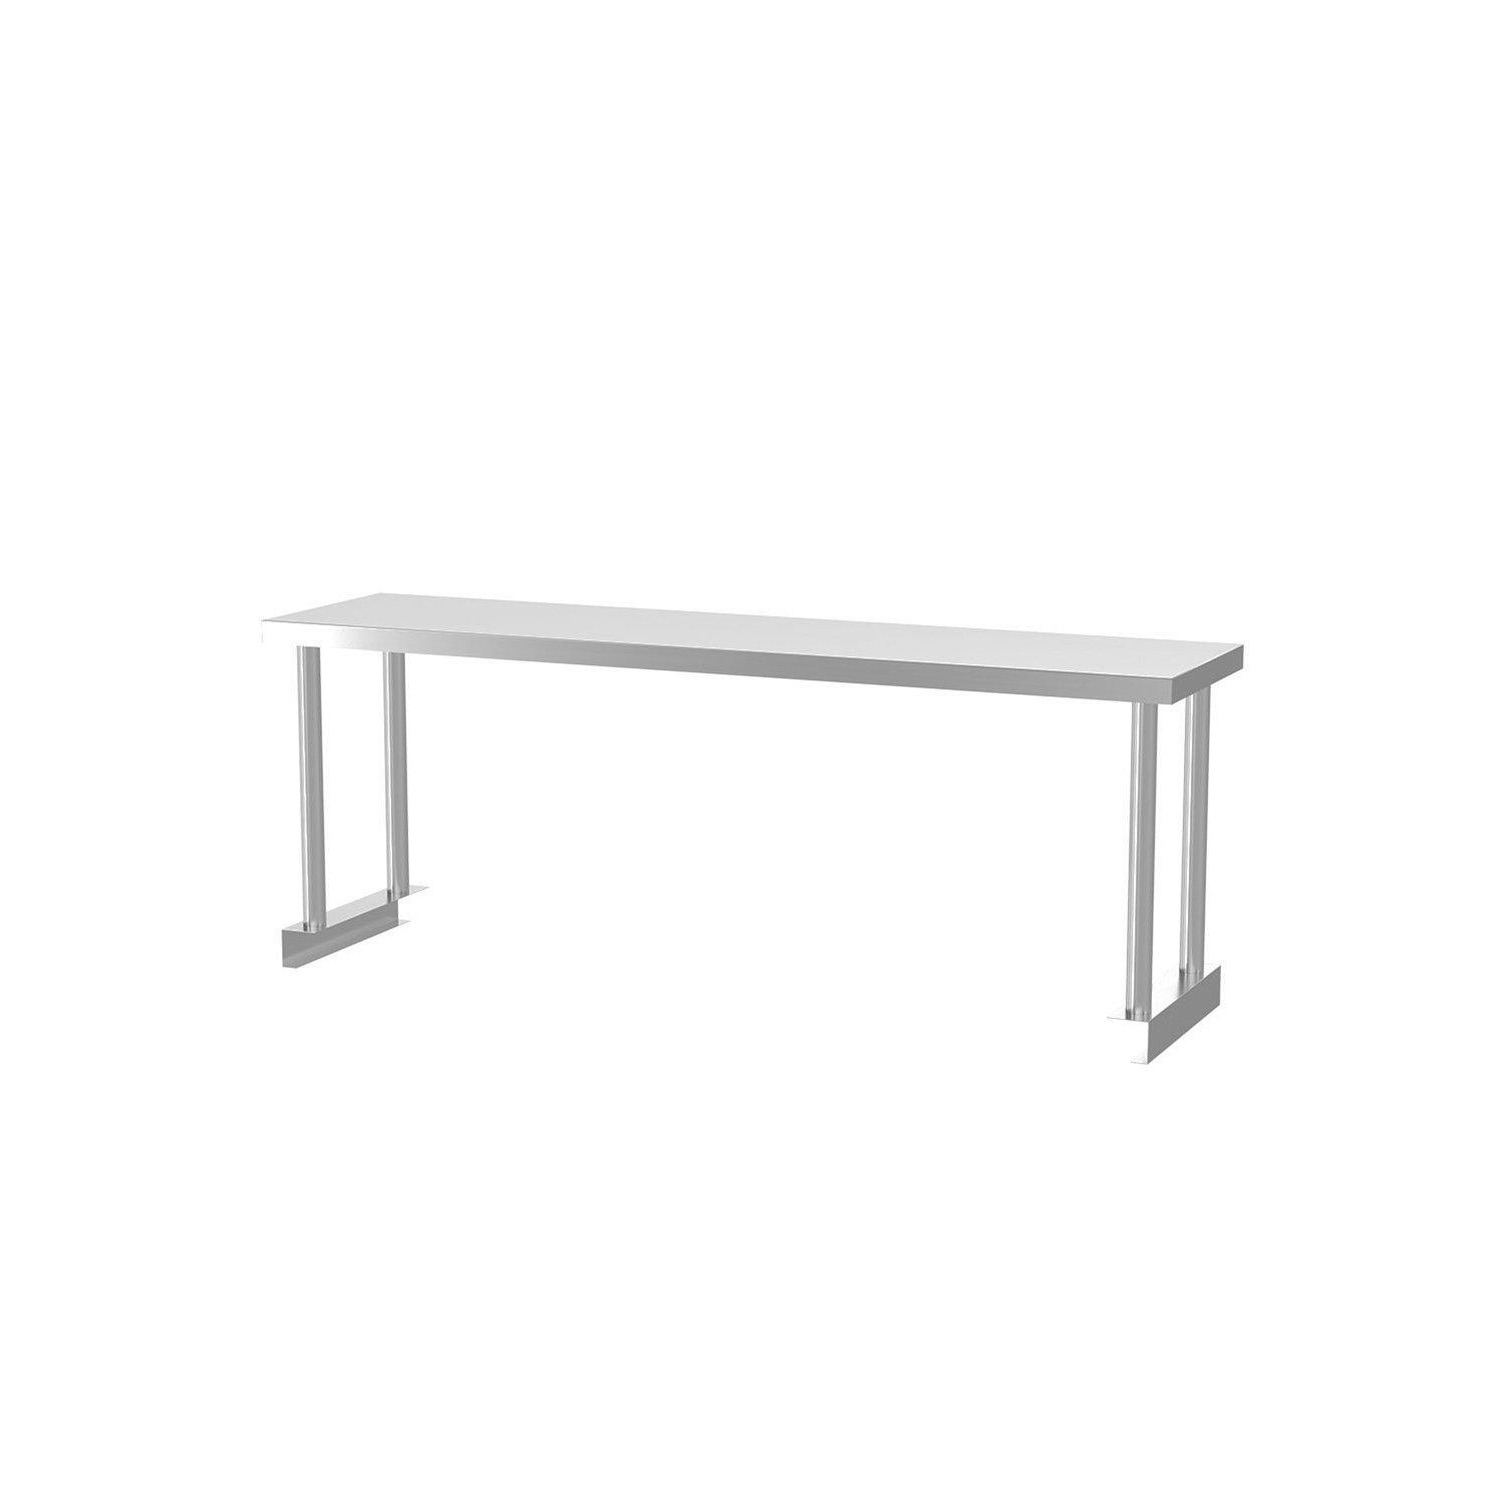 Stainless Steel Catering Table Top Bench Over Shelf Kitchen Worktop Commercial - image 1